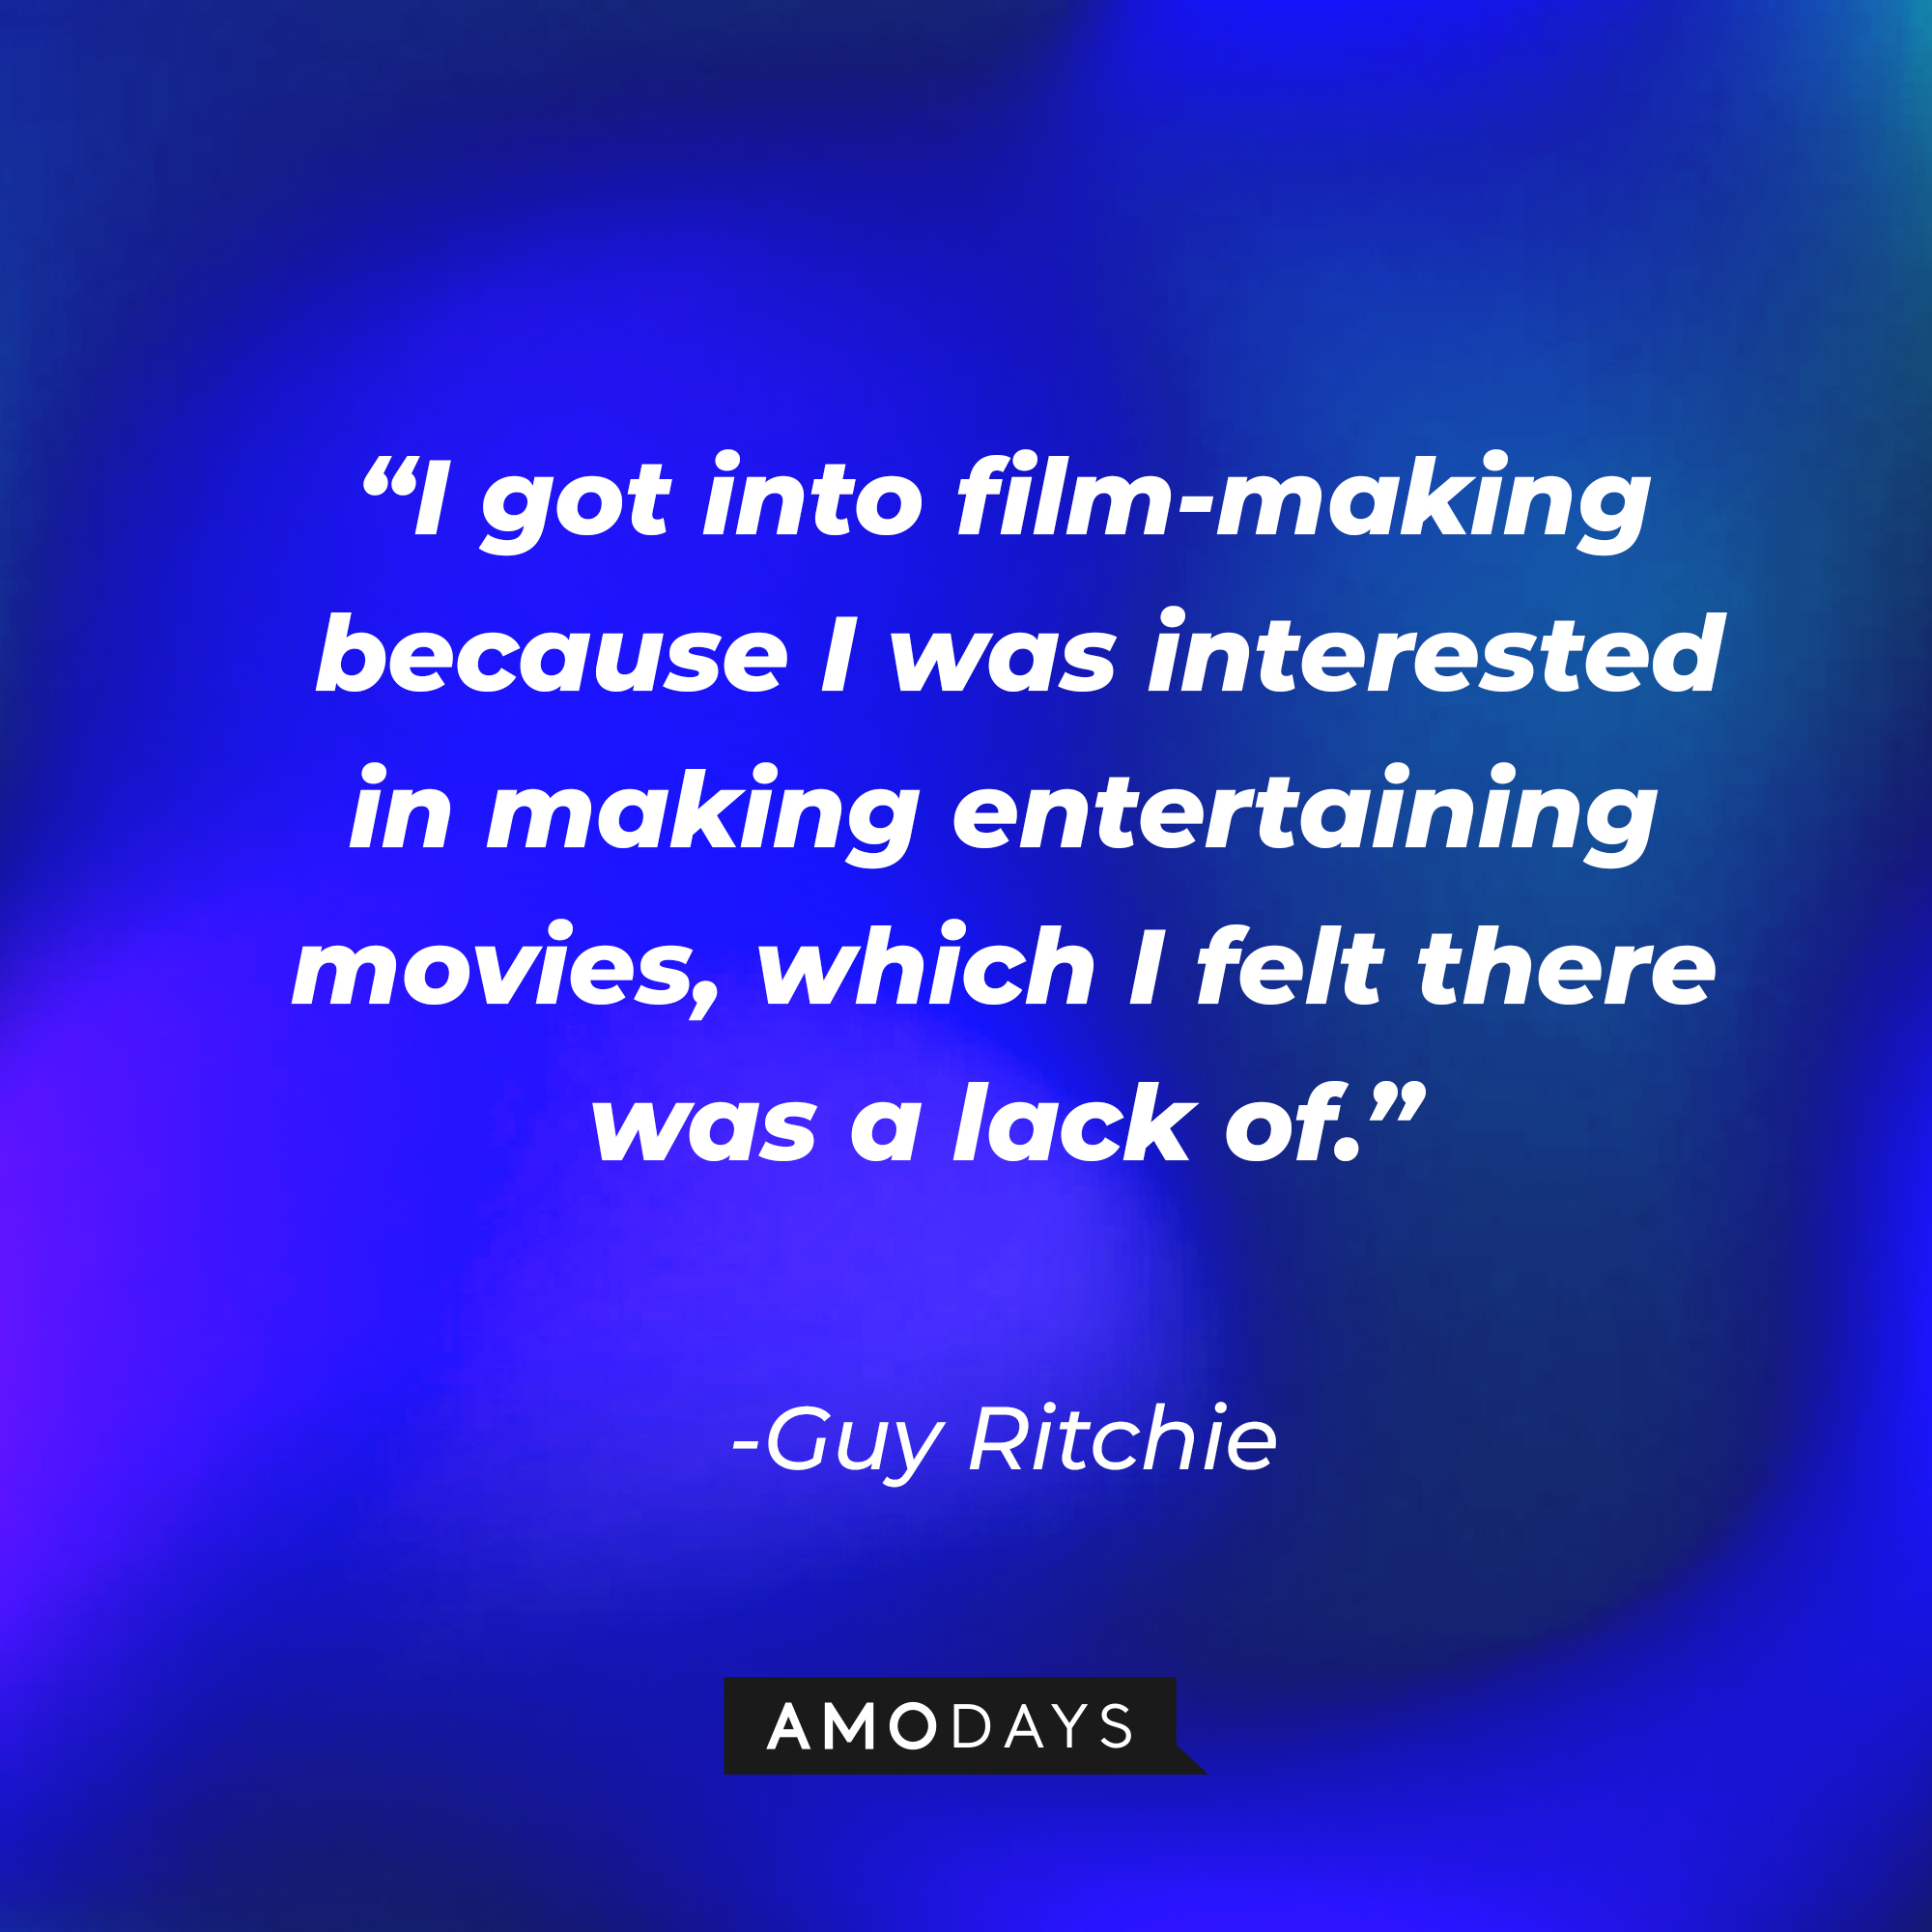 Guy Ritchie's quote, “I got into film-making because I was interested in making entertaining movies, which I felt there was a lack of.” | Source: AmoDays